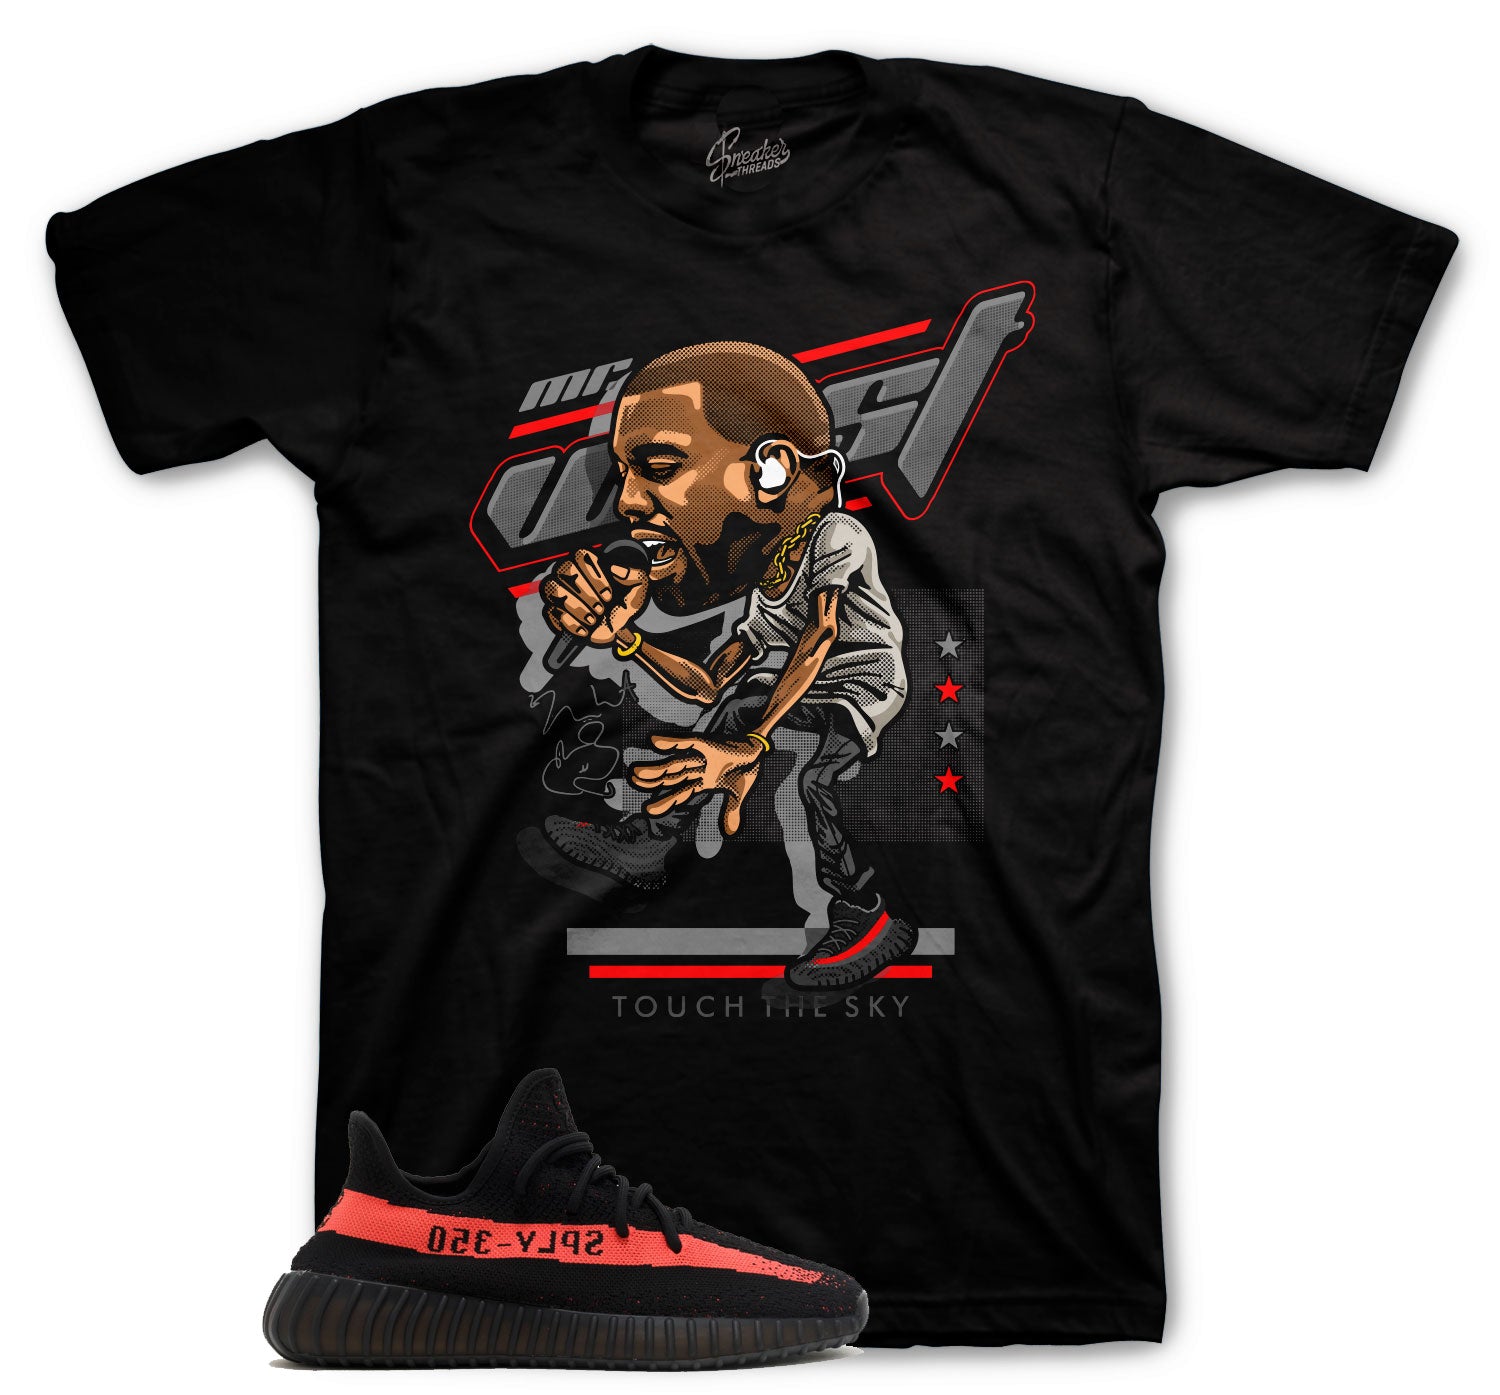 Yeezy 350 Red Stripe Sneaker Shirts - Touch The Sky TShirts - Black